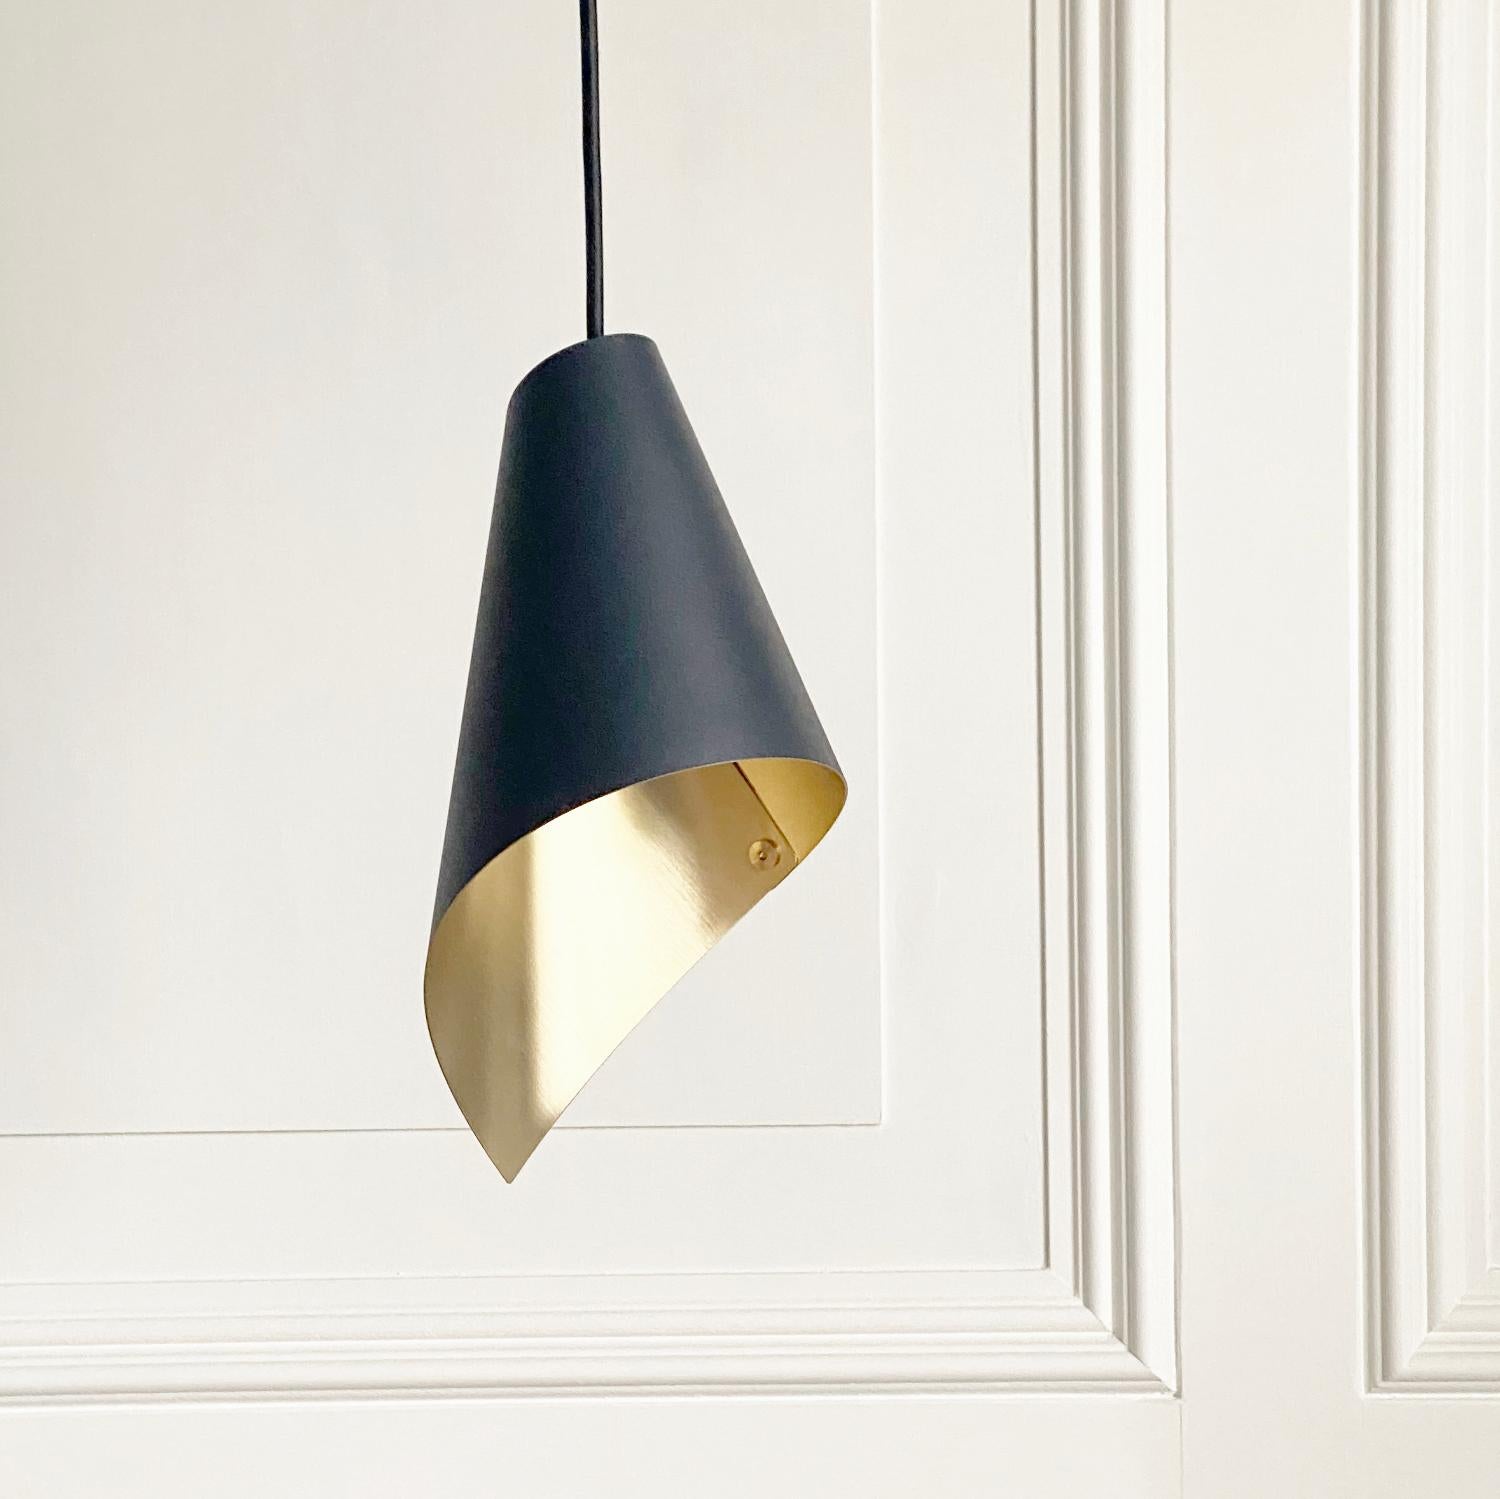 The black & brushed brass ARC MAXI pendant light can be used in many different configurations to stunning effect. Hang singles or in rows to create individual pools of light or in clusters of 3 or 5 to give wider illumination.

Hand wrapped from a